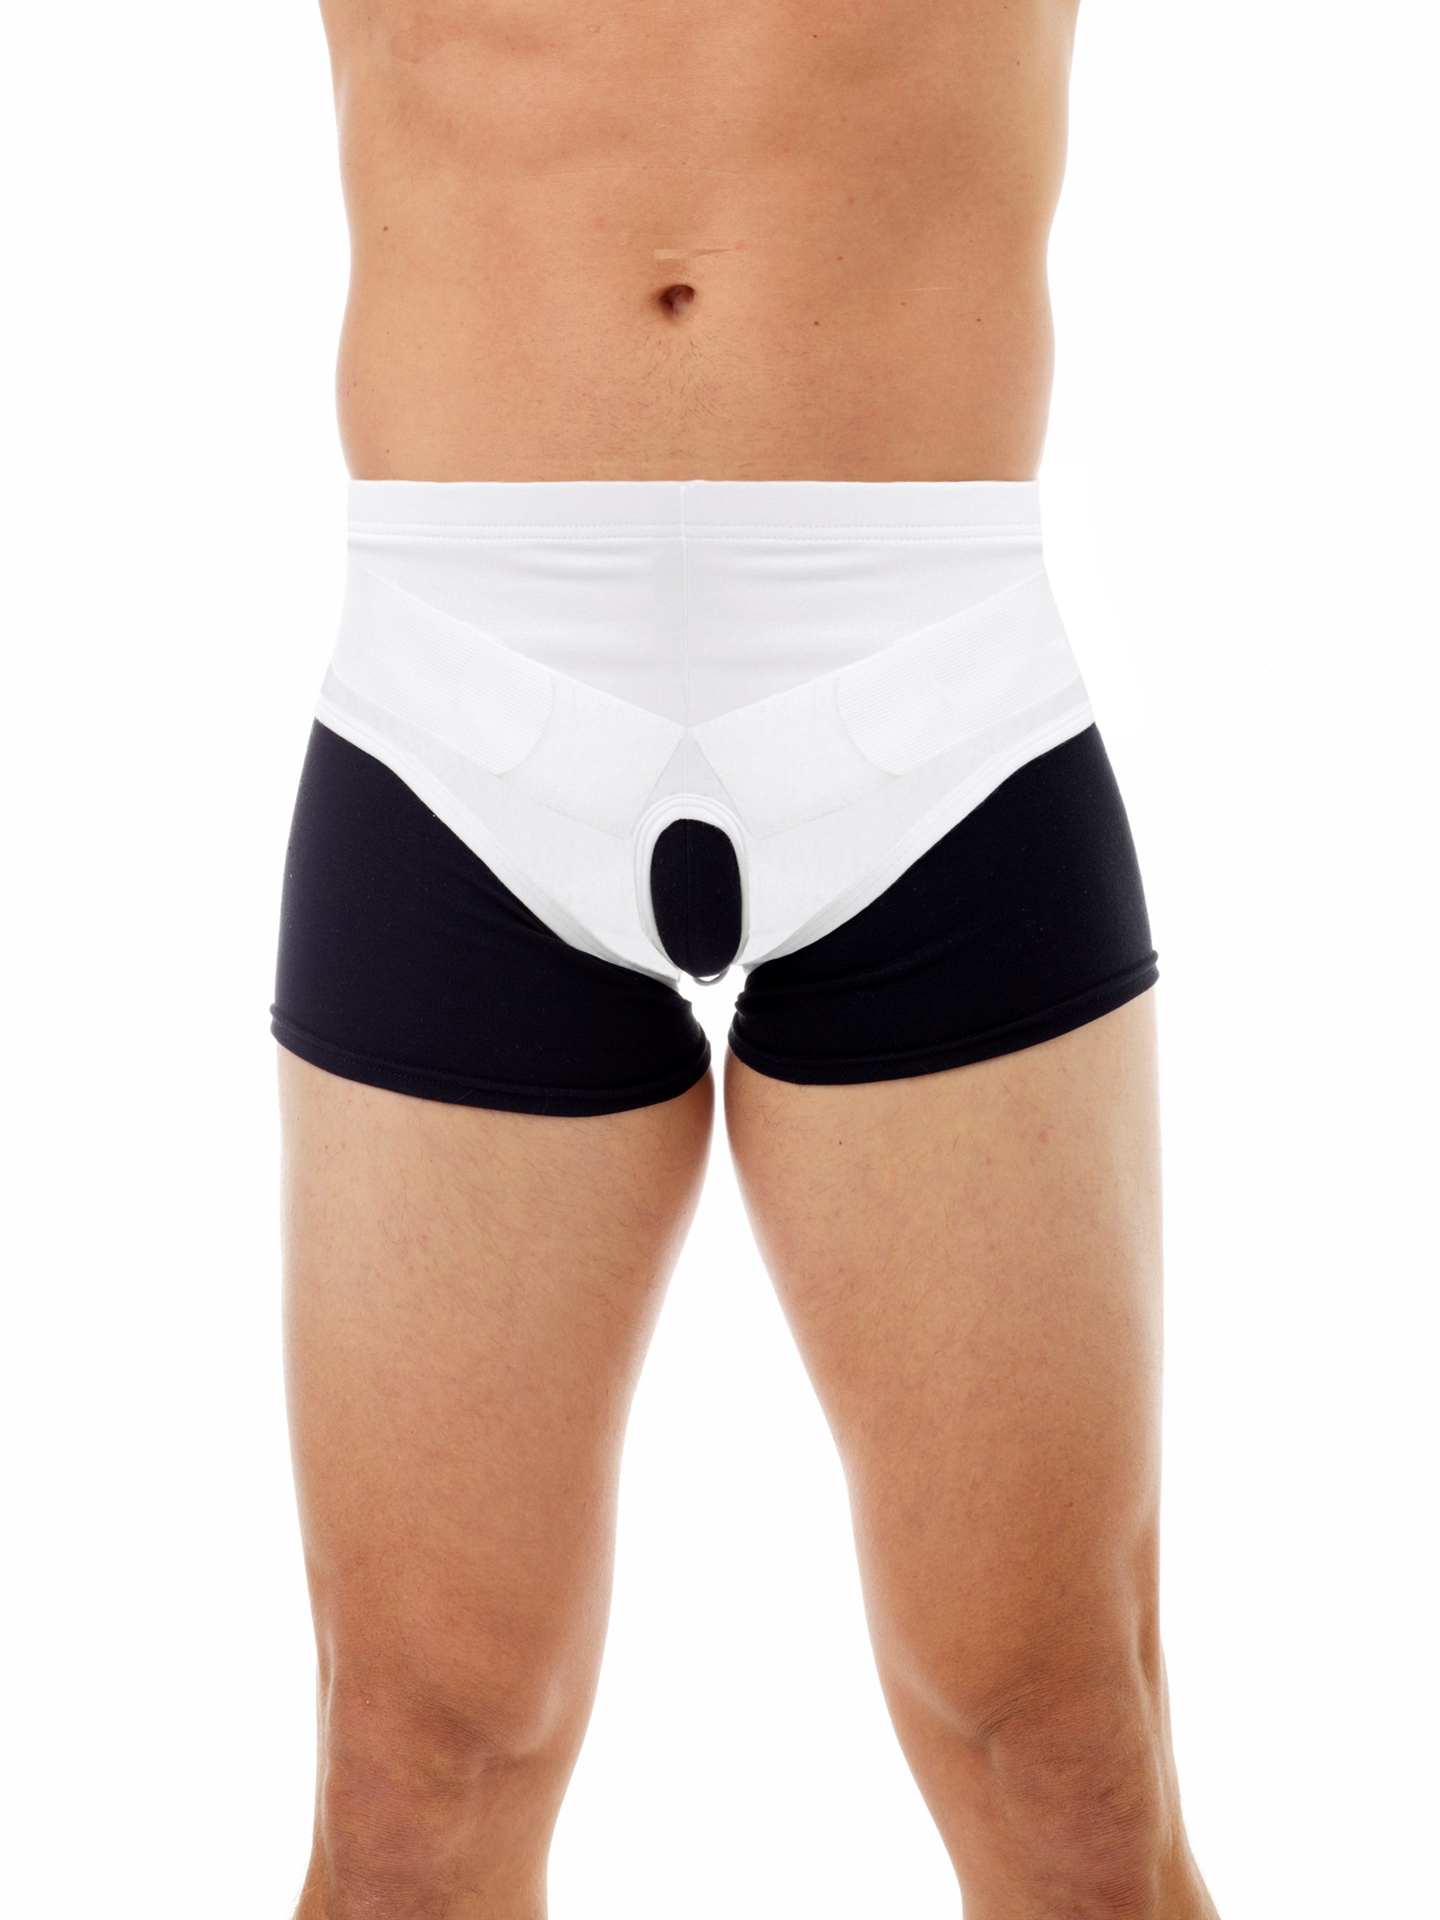 https://www.underworks.com/images/thumbs/0002184_unisex-inguinal-hernia-cotton-comfort-support-brace-with-hot-cold-therapy-gel-pads-single-or-double.jpeg